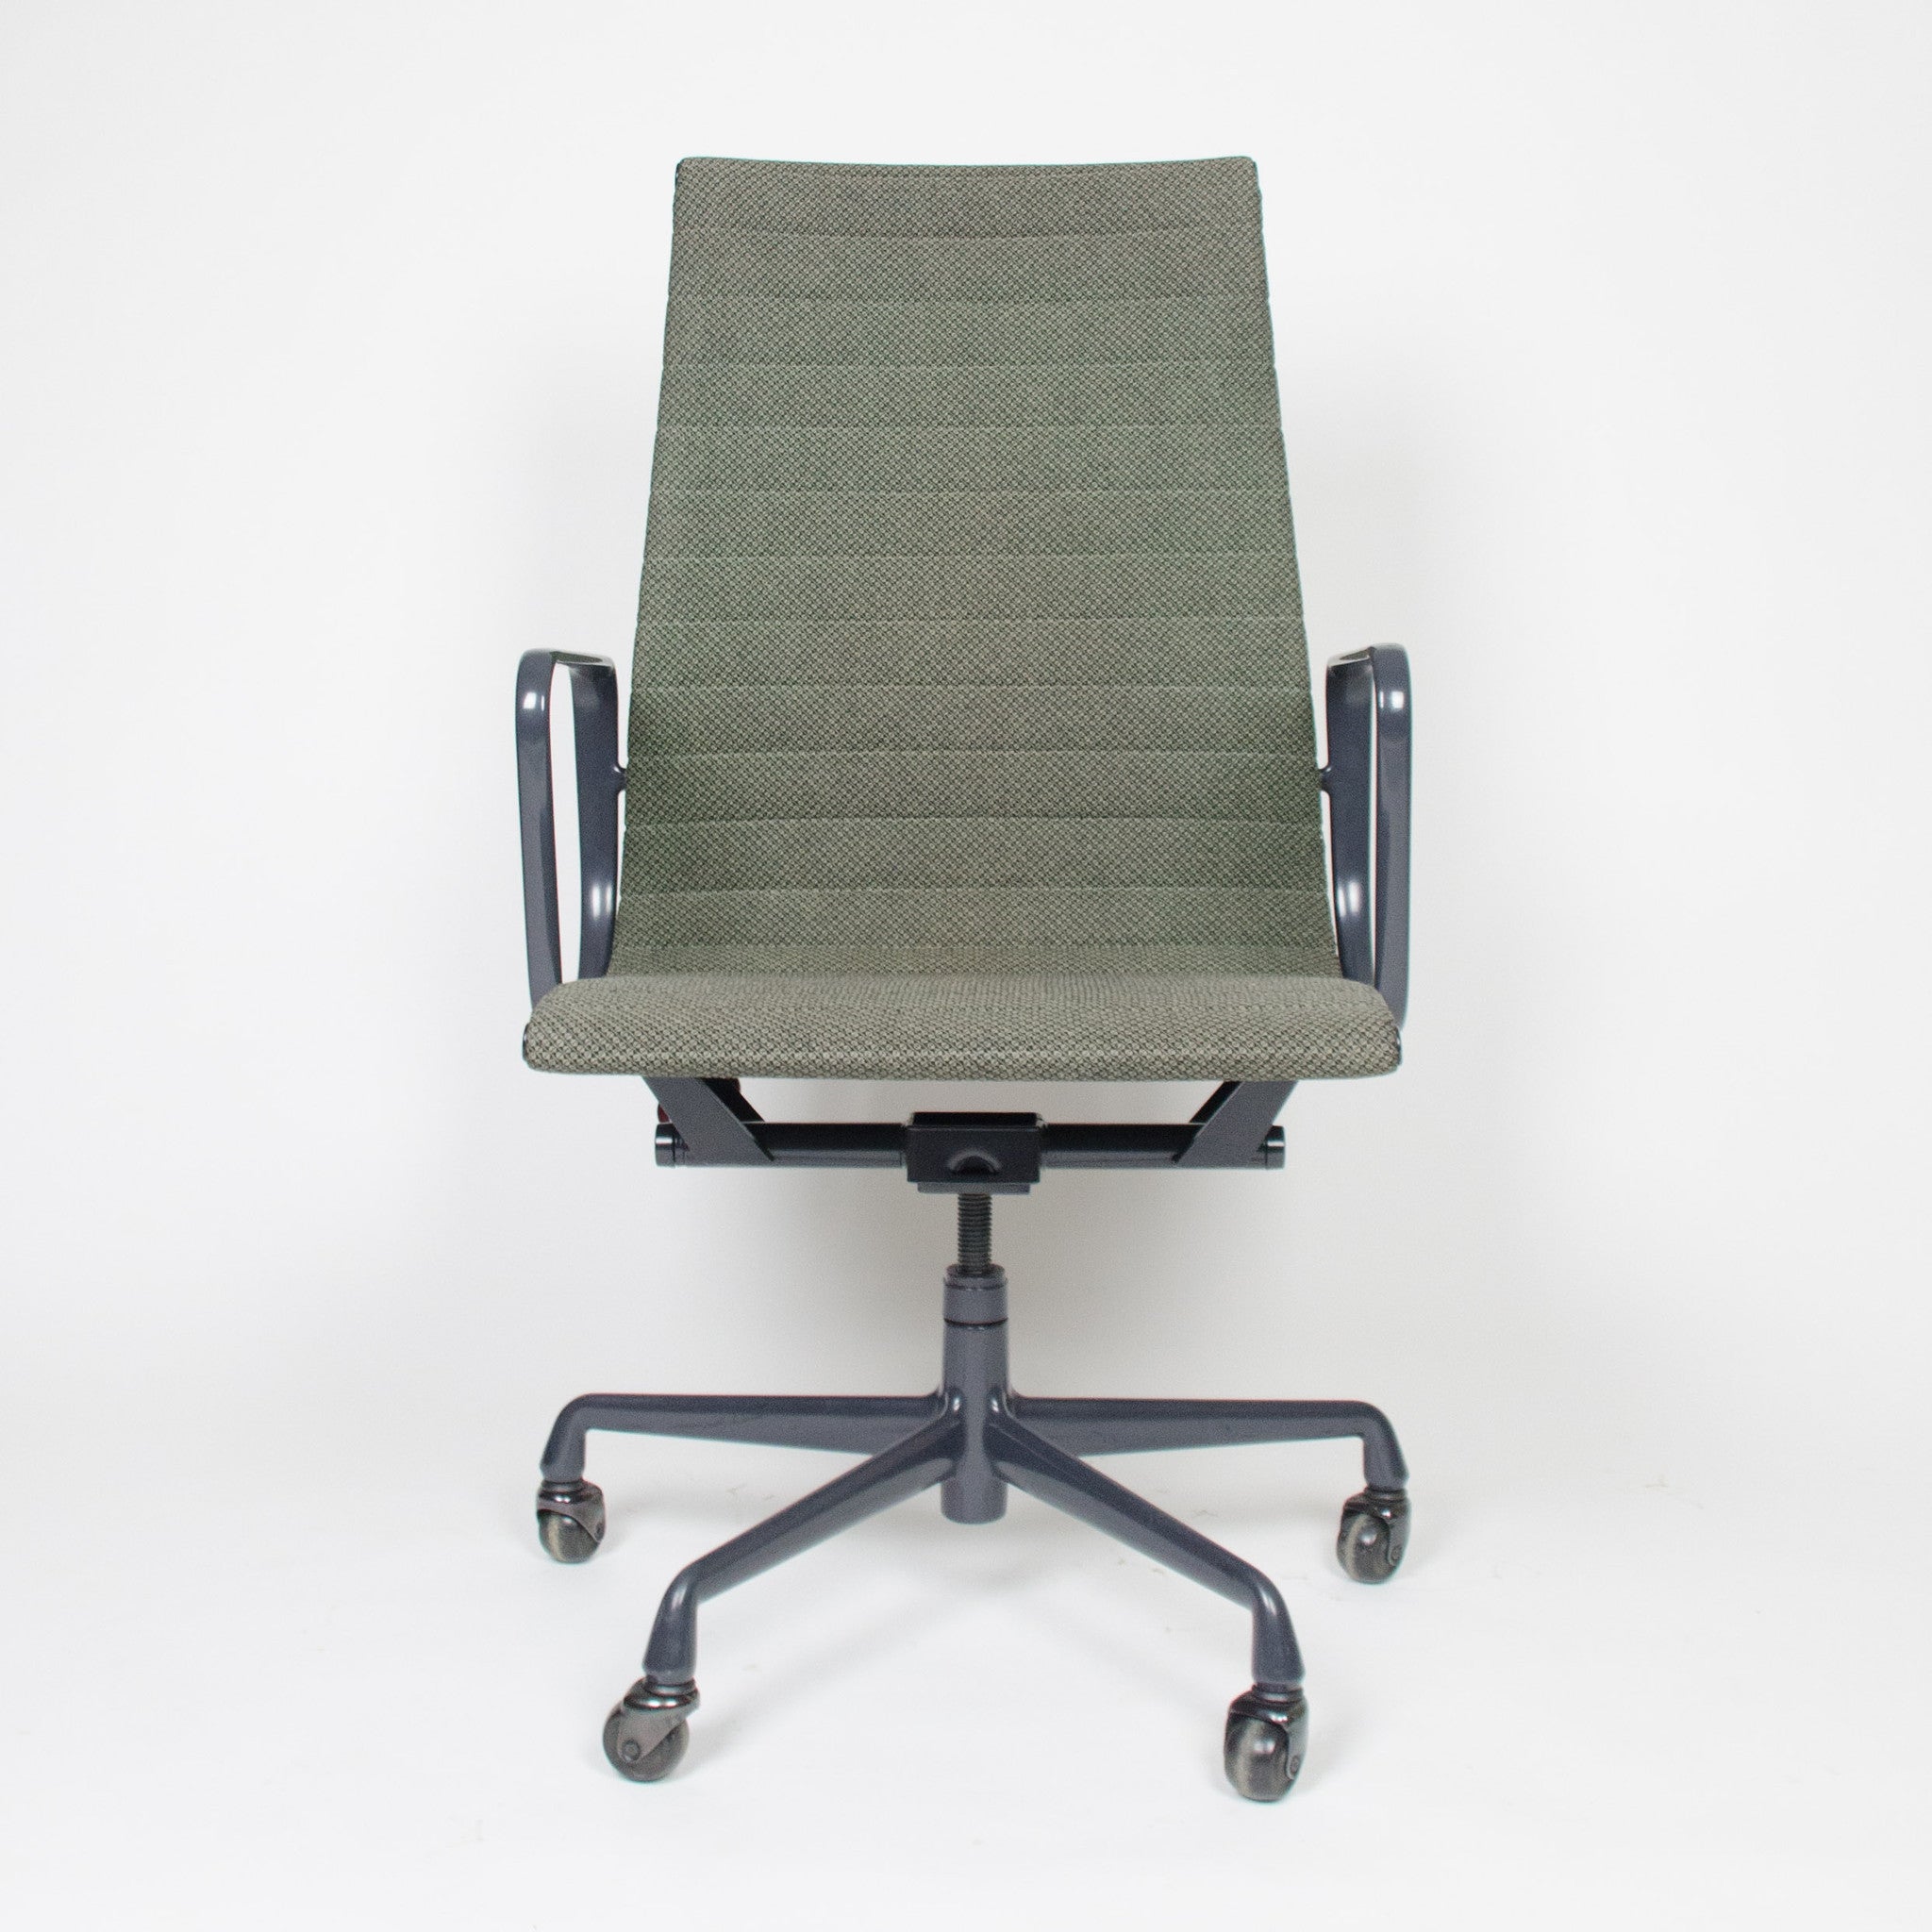 SOLD Eames Herman Miller Fabric High Executive Aluminum Group Desk Chairs